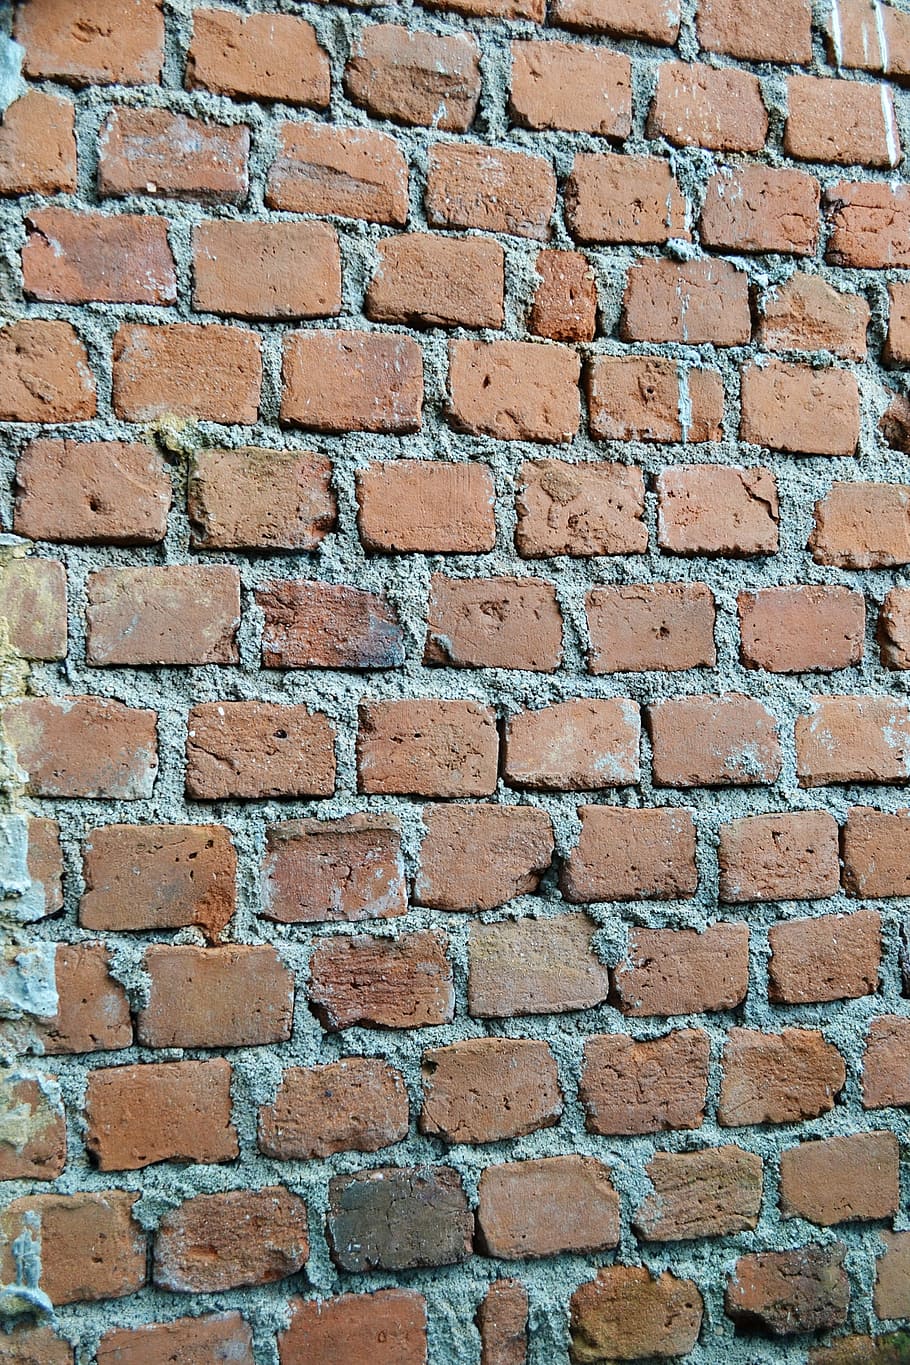 bricks, texture, wall, fence, protection, not plastered wall